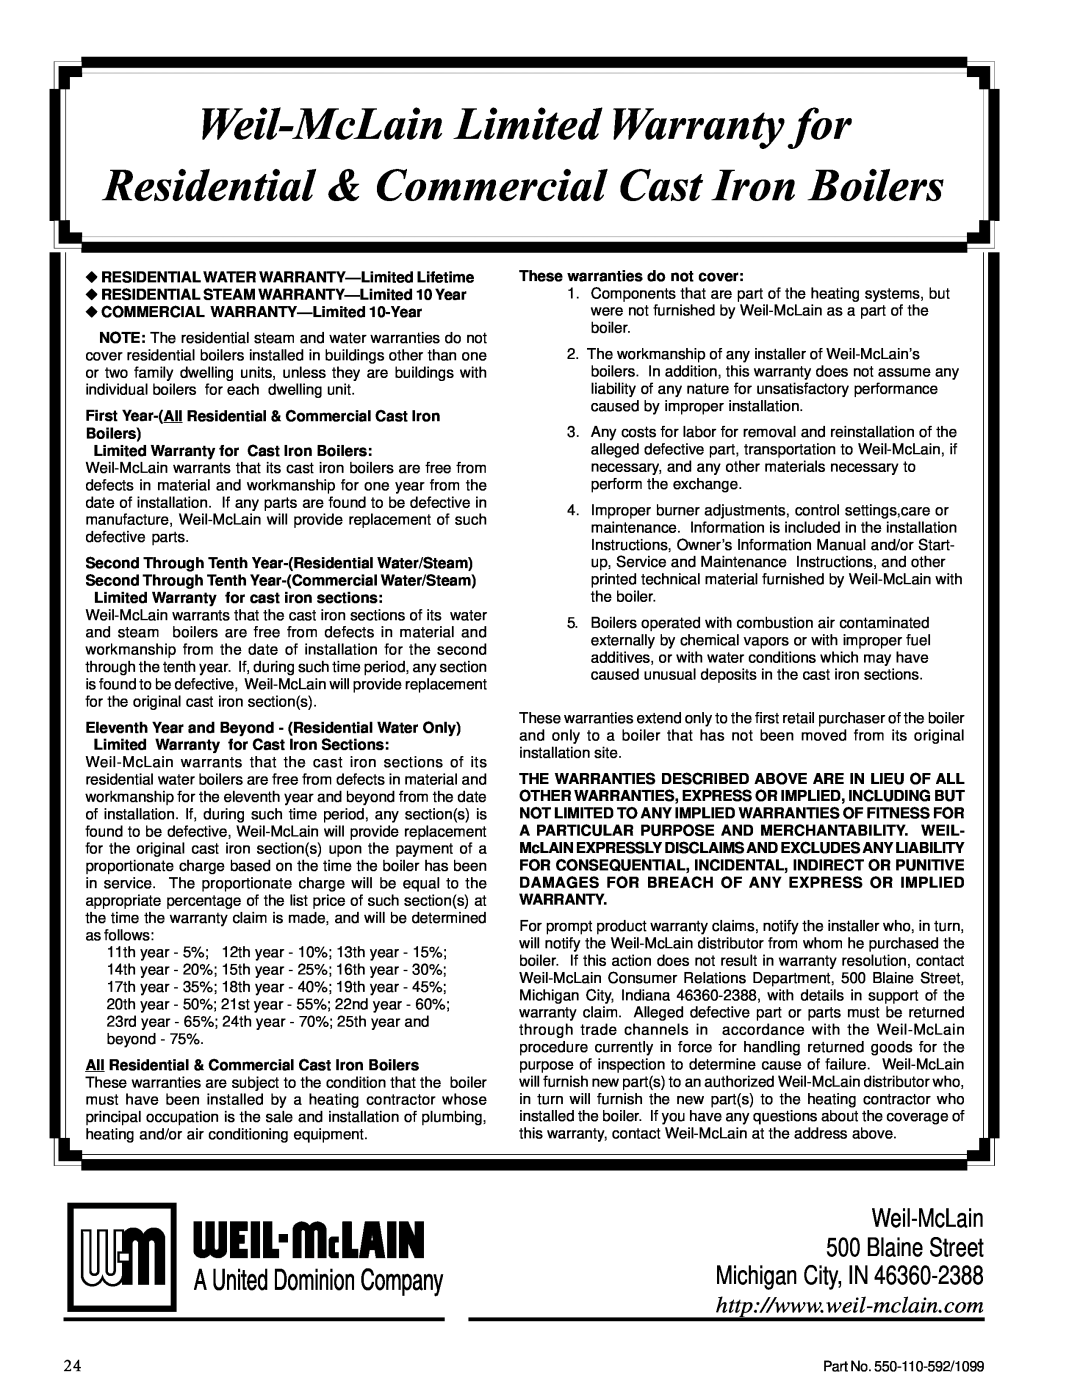 Weil-McLain CGa Weil-McLainLimited Warranty for, Residential & Commercial Cast Iron Boilers, These warranties do not cover 